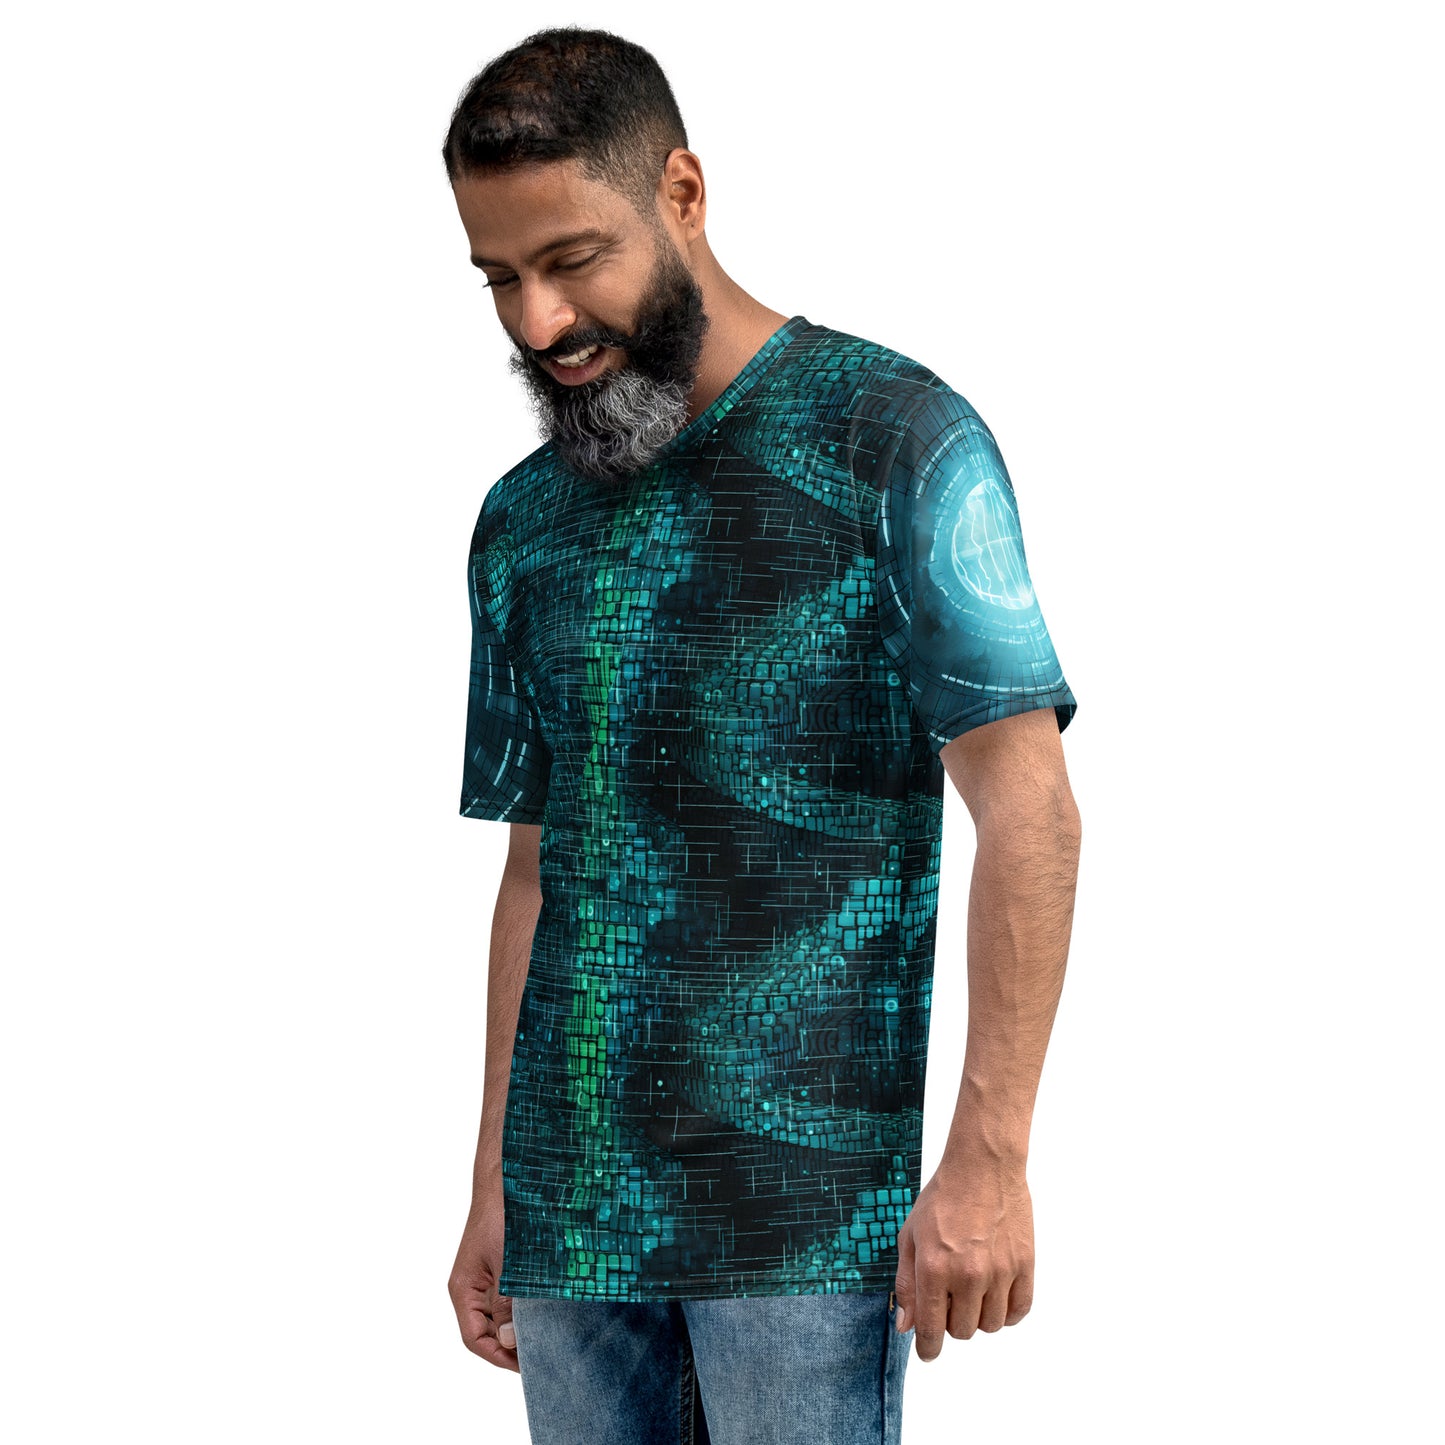 Cryptic Core All-Over Men's T-shirt